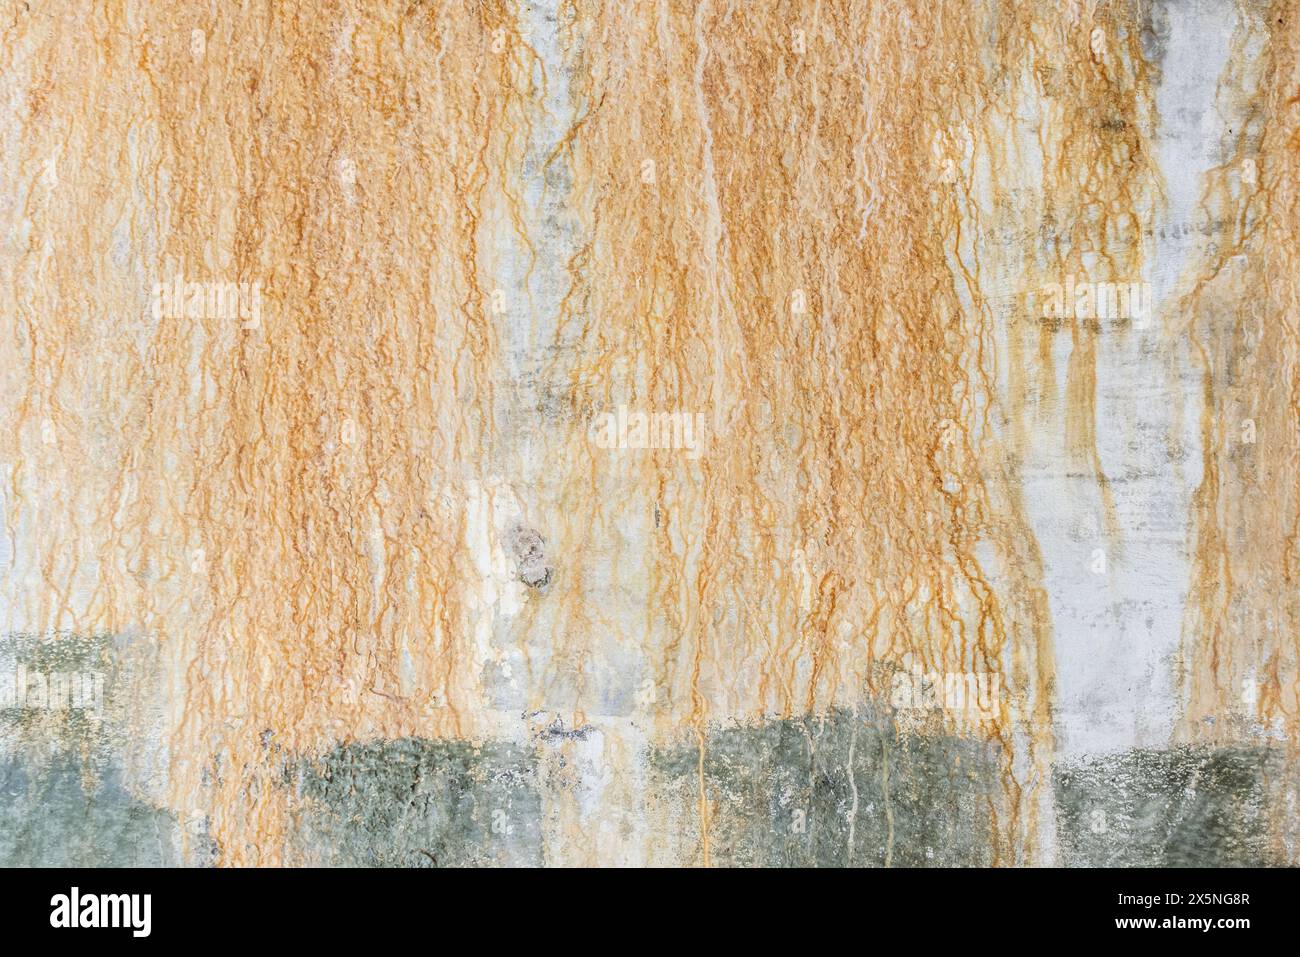 USA, Washington State, Whidbey Island. Fort Casey Historical State Park, rusty wall abstract Stock Photo